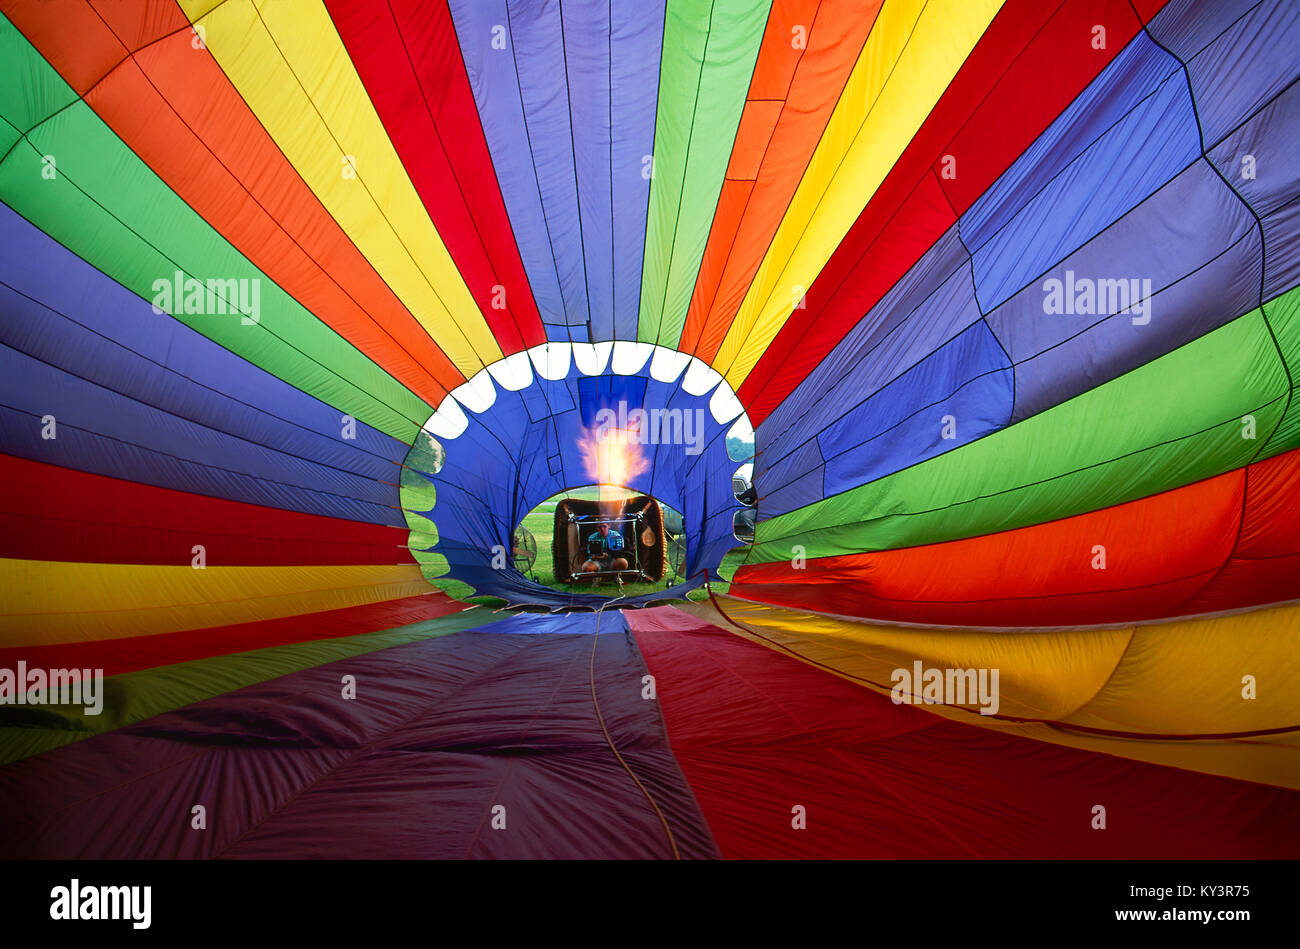 View from the inside of hot air balloon as fire heats the air the balloon rises off the ground. Stock Photo